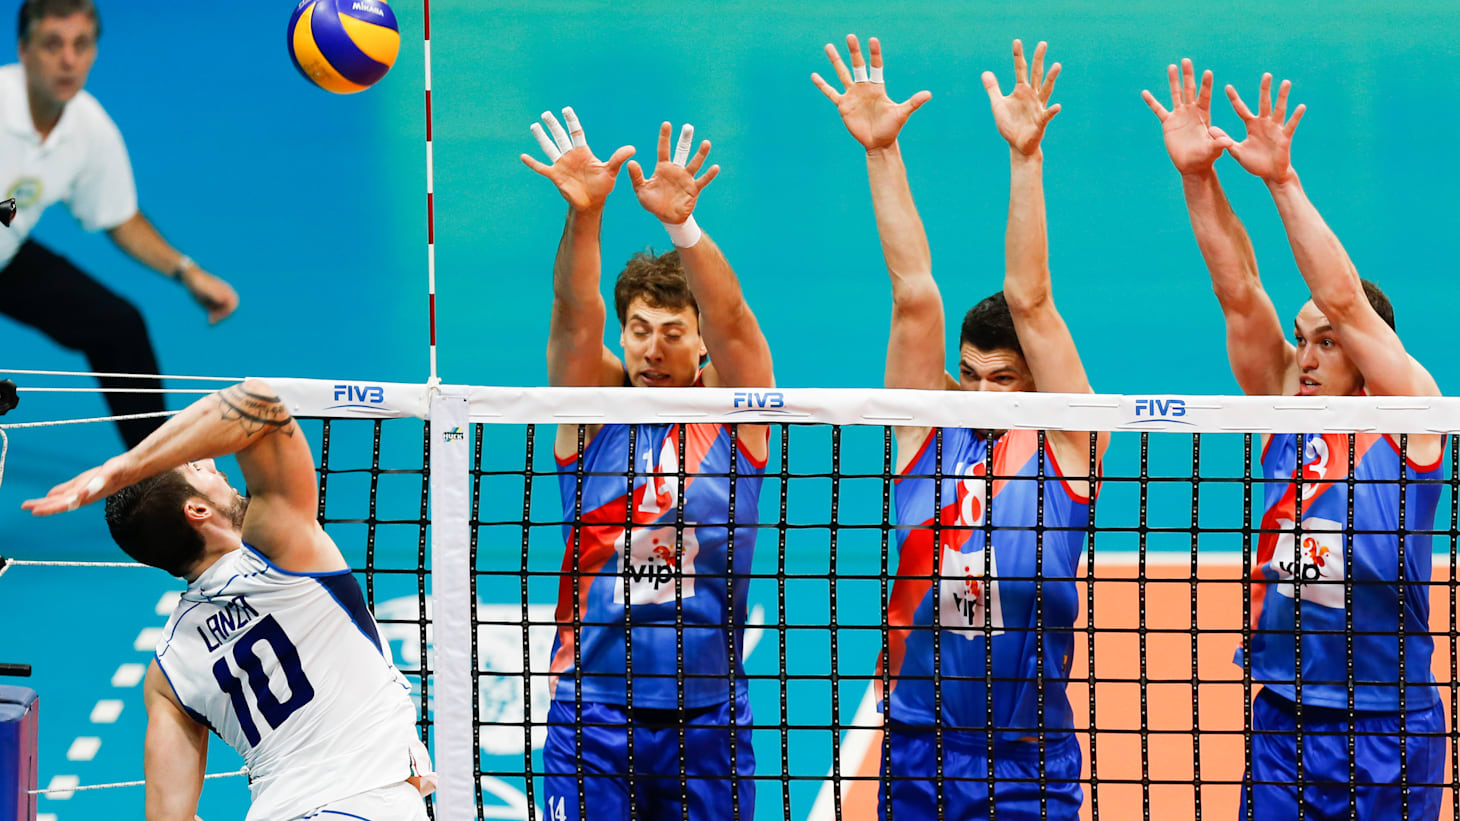 Volleyball rules: Know regulations, size and players